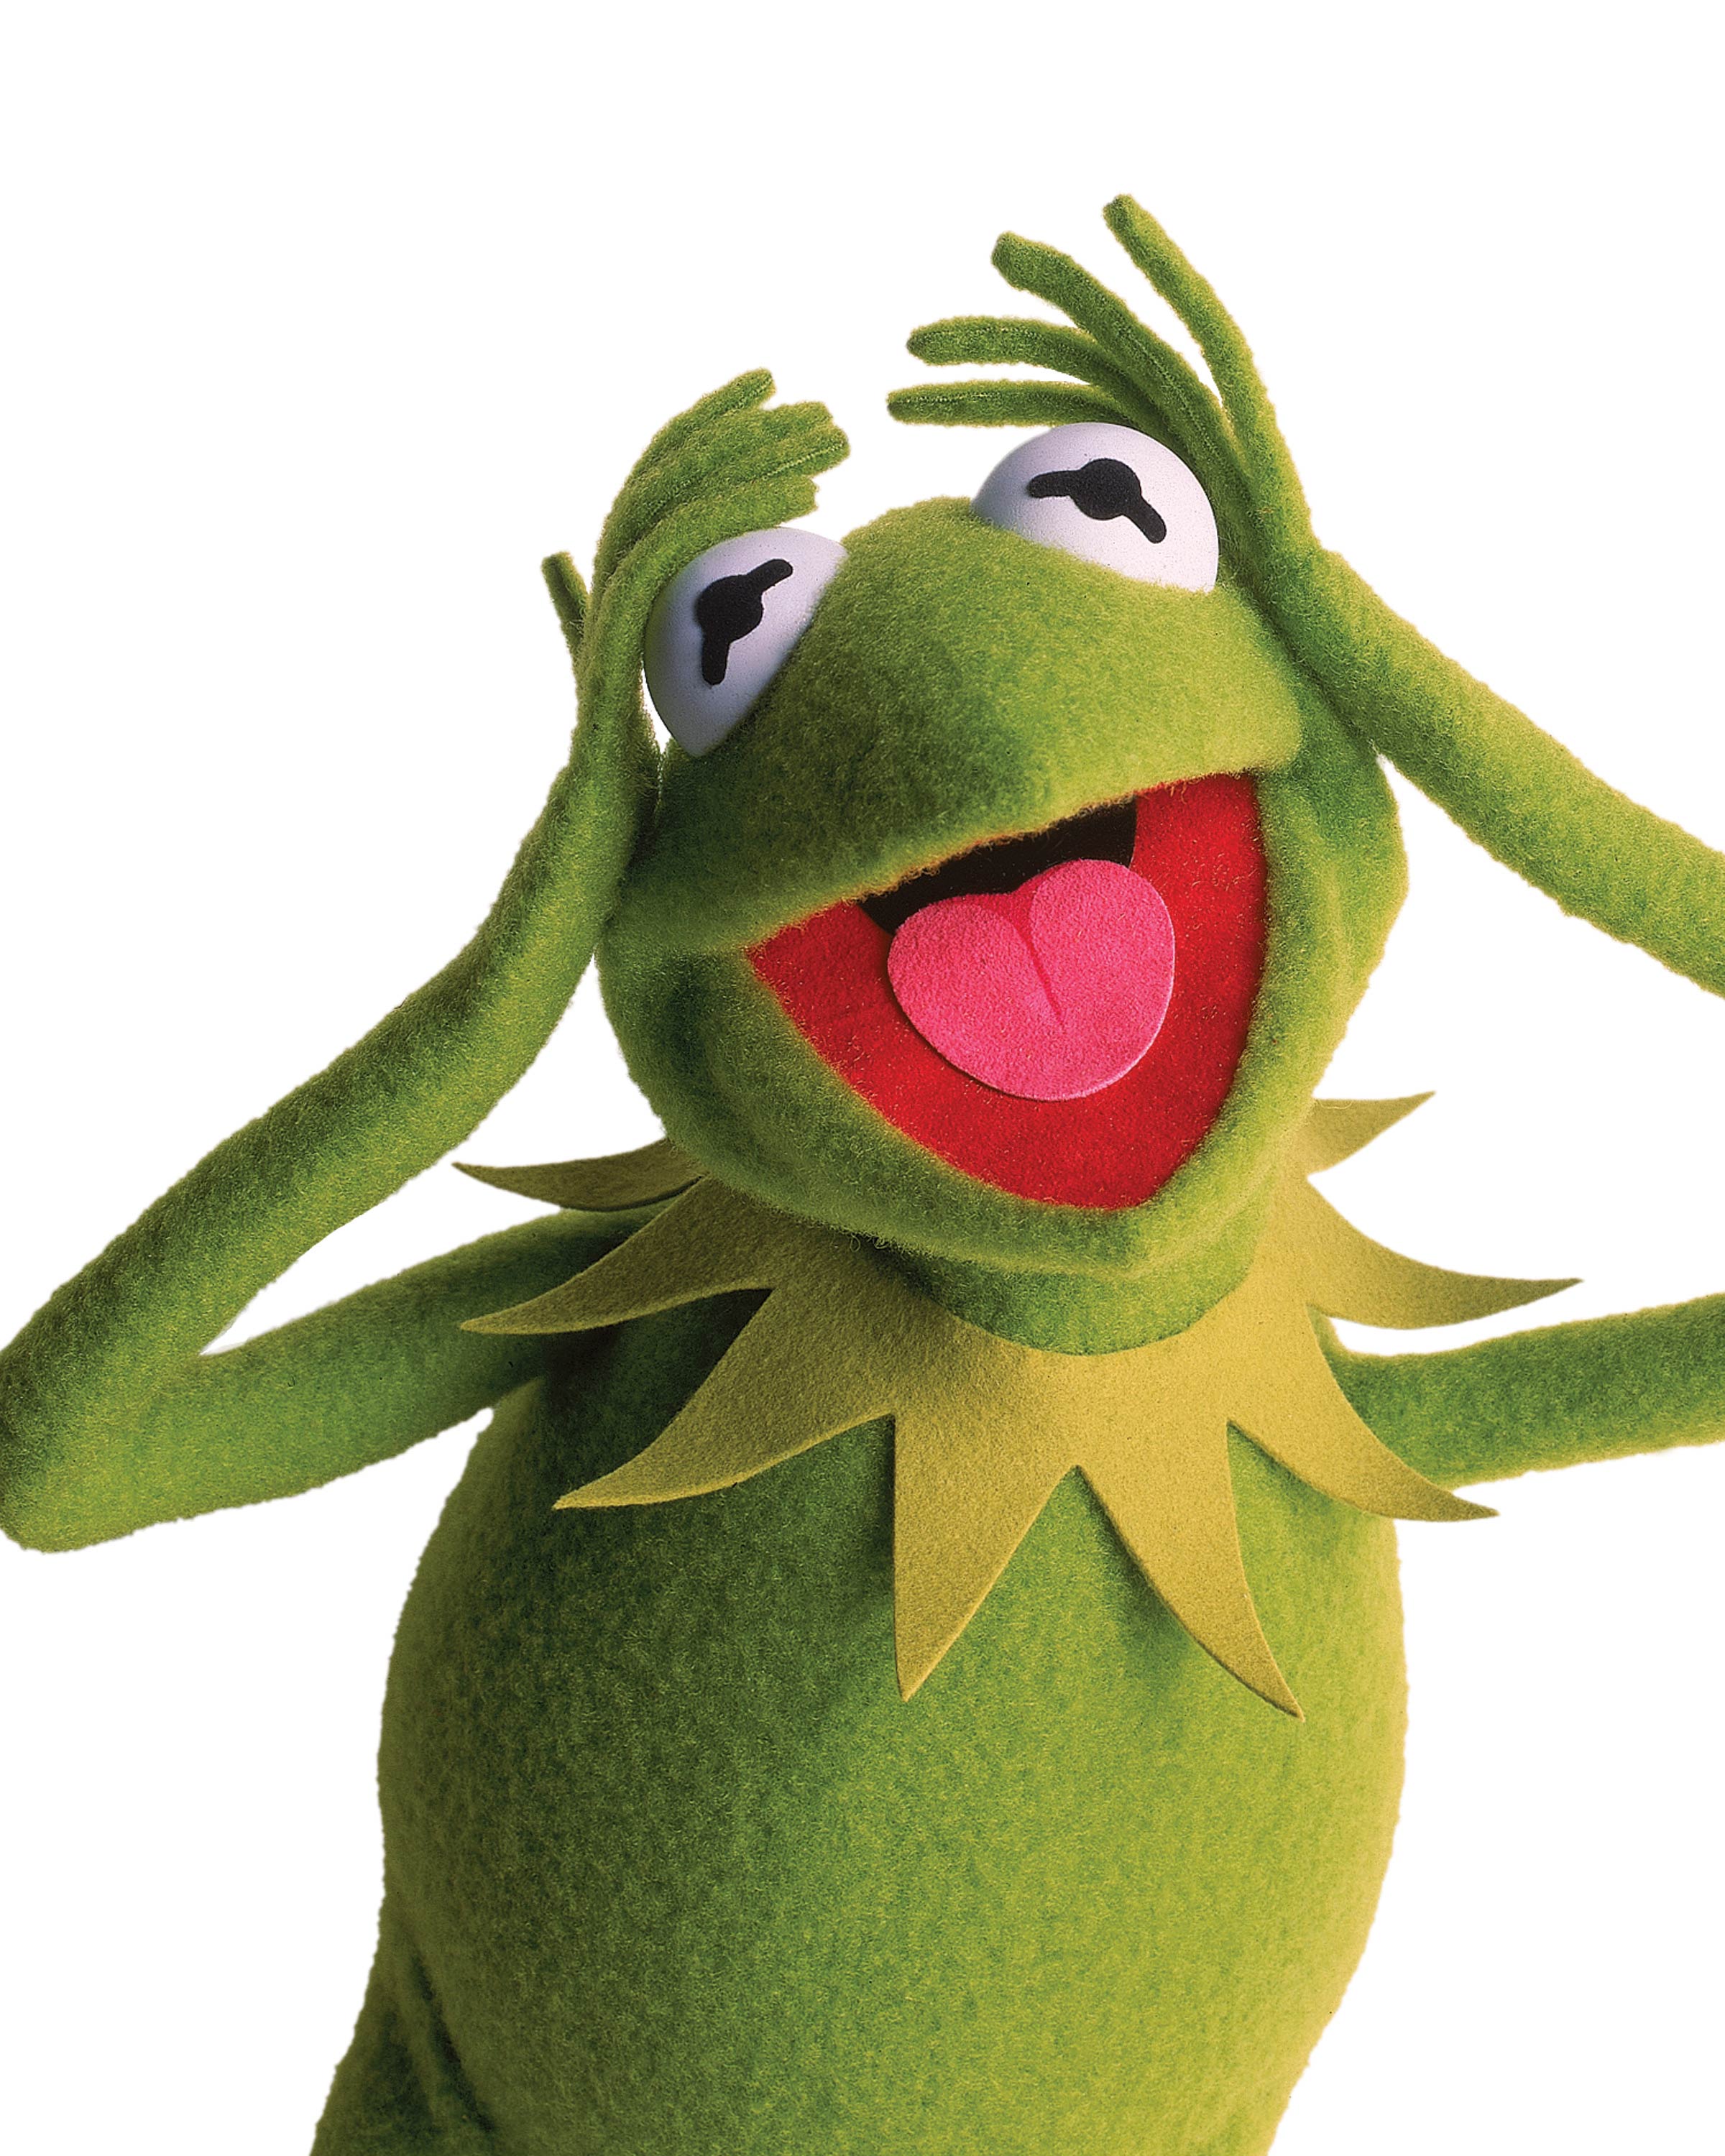 Kermit the Frog from the 2011 Muppets Movie Desktop Wallpaper